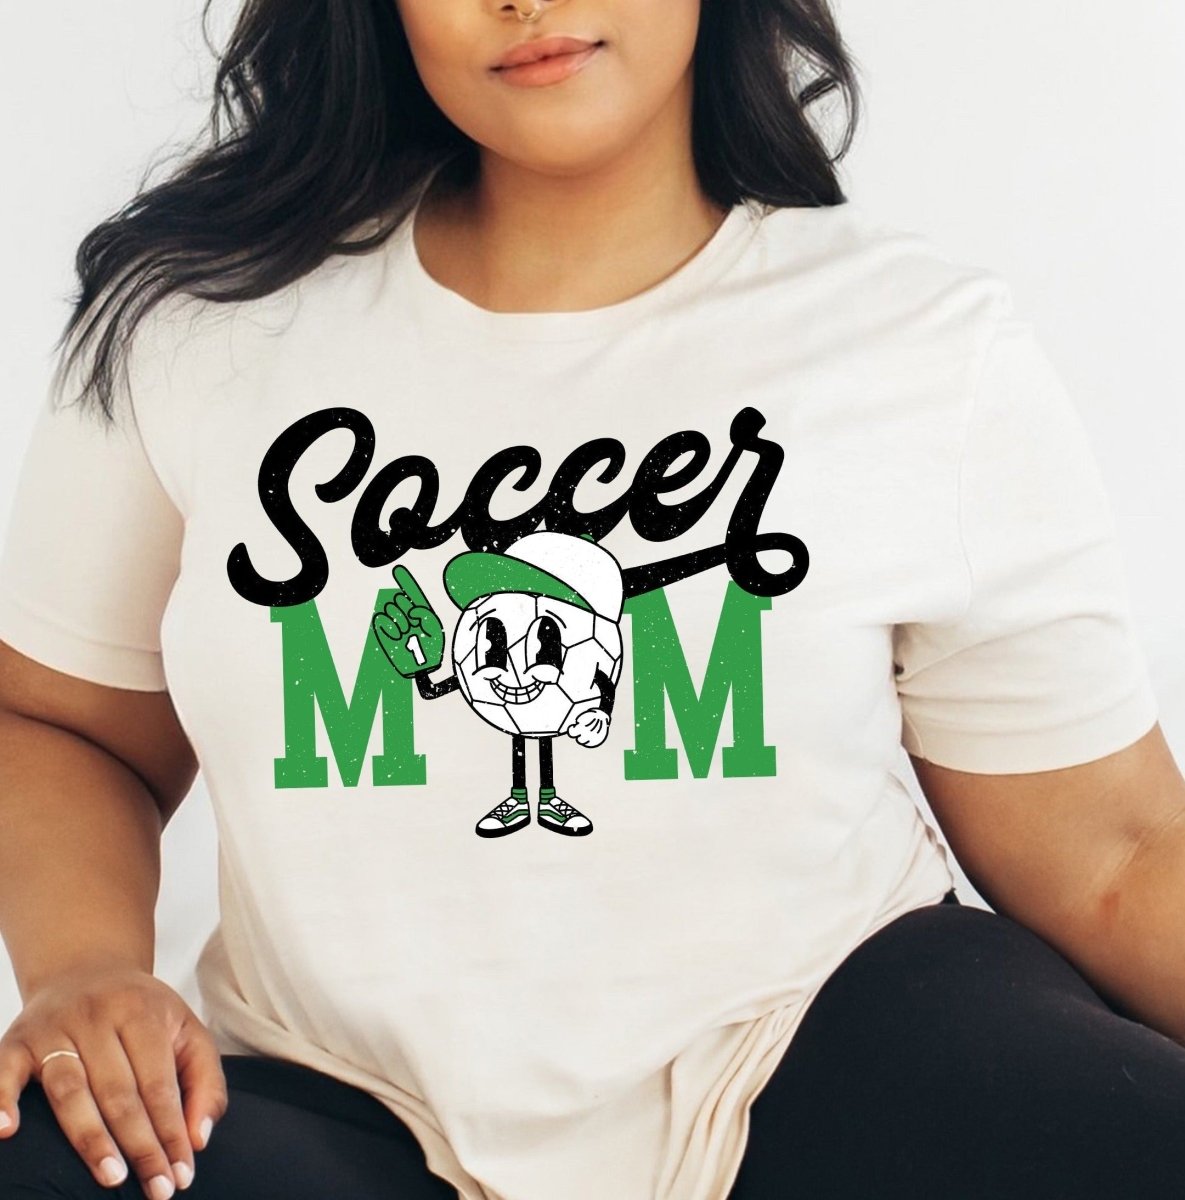 Soccer Mom Ball Wholesale Tee - Limeberry Designs